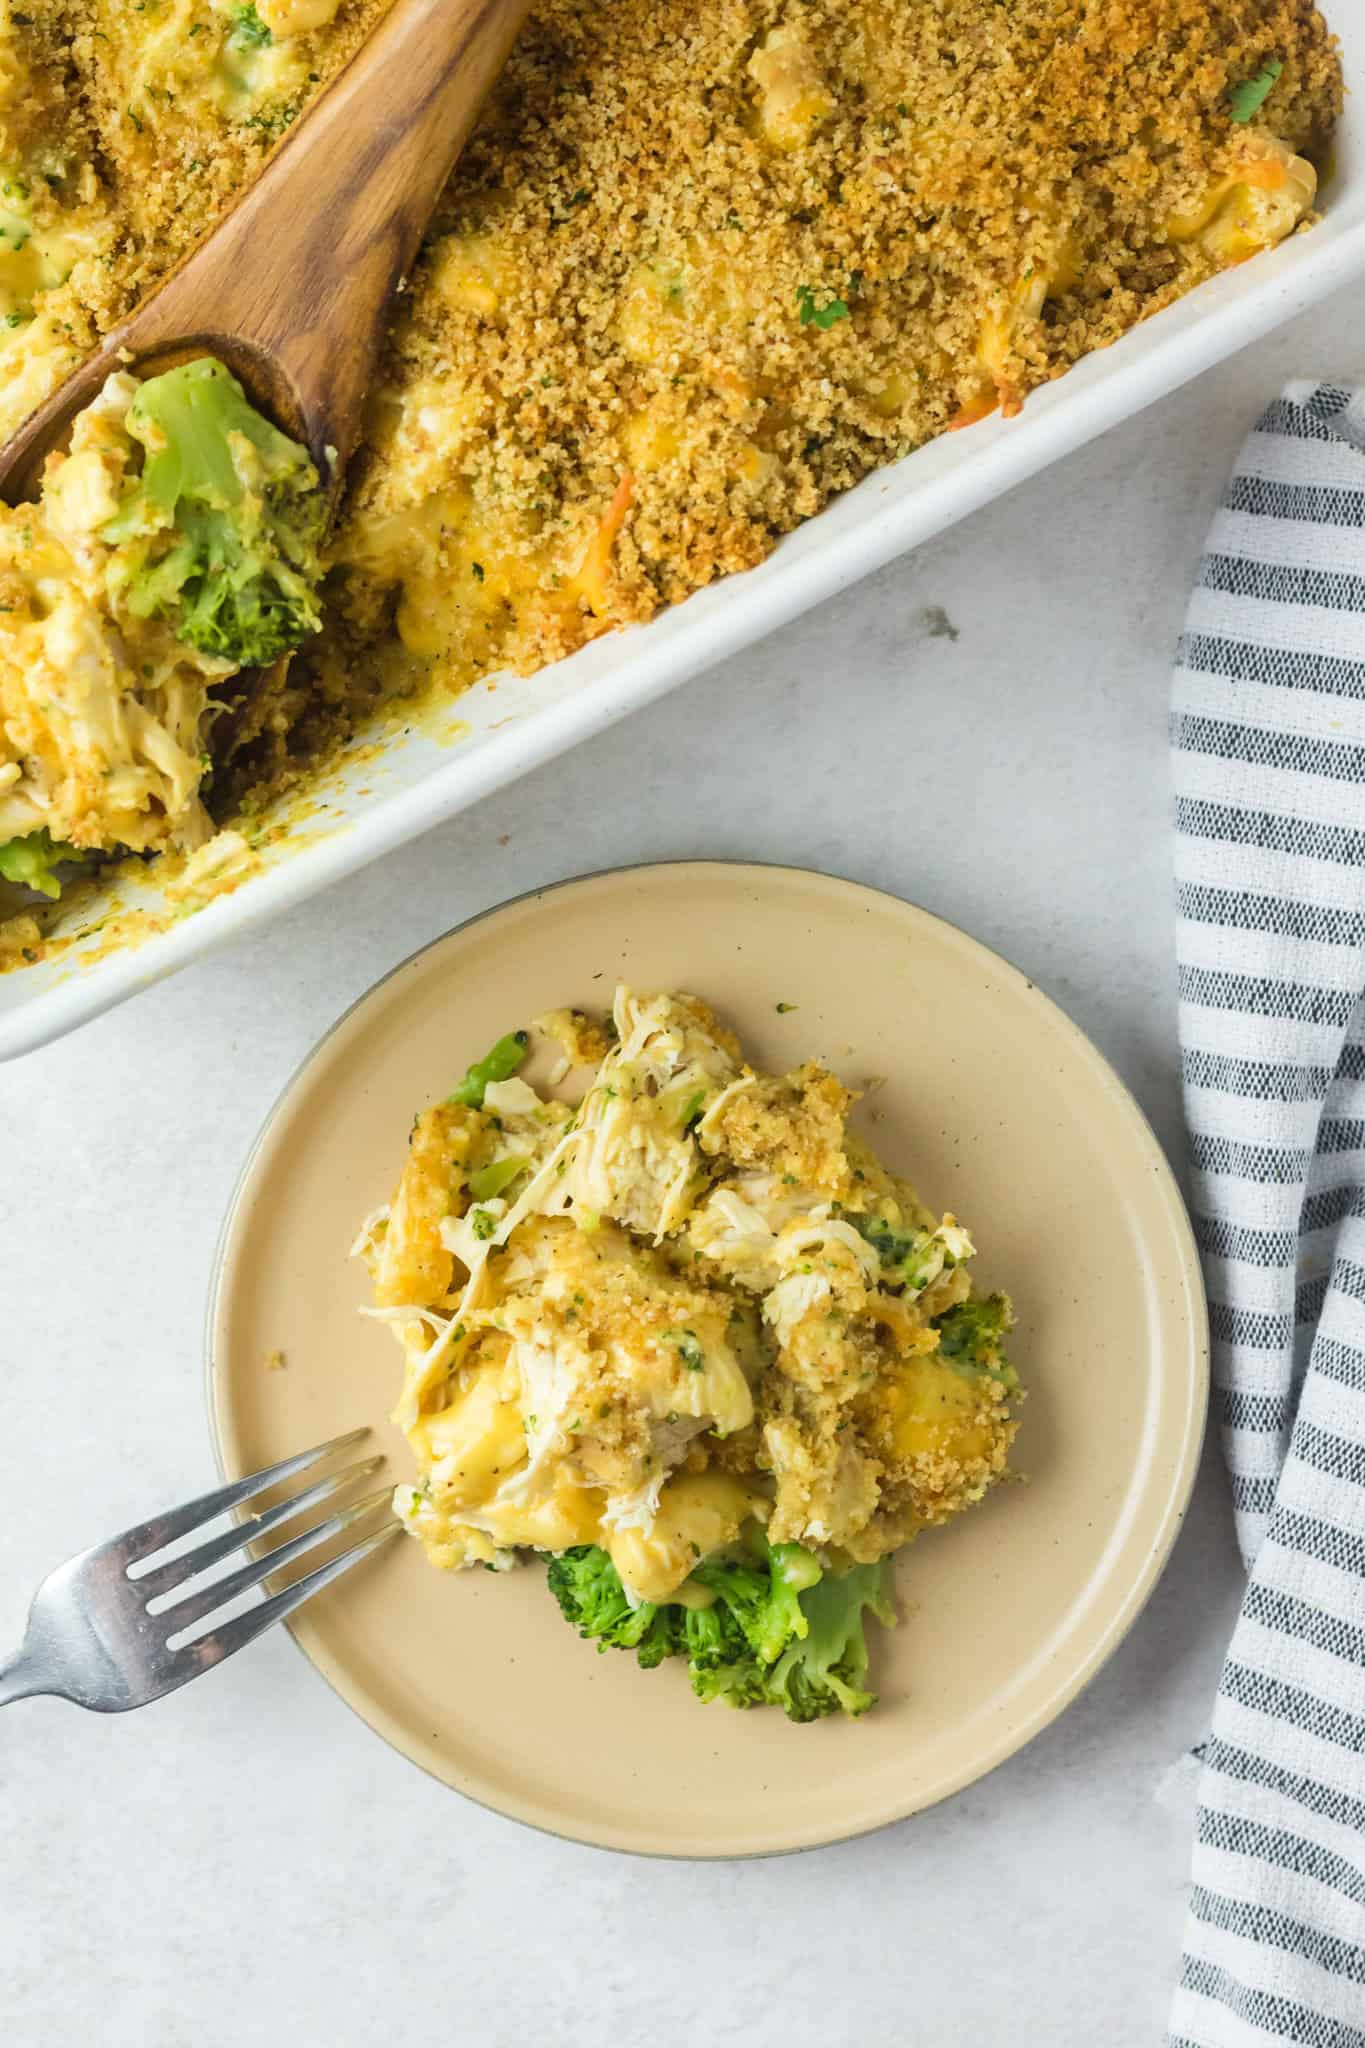 Chicken Divan is a creamy, cheesy chicken and broccoli casserole with a breadcrumb topping.